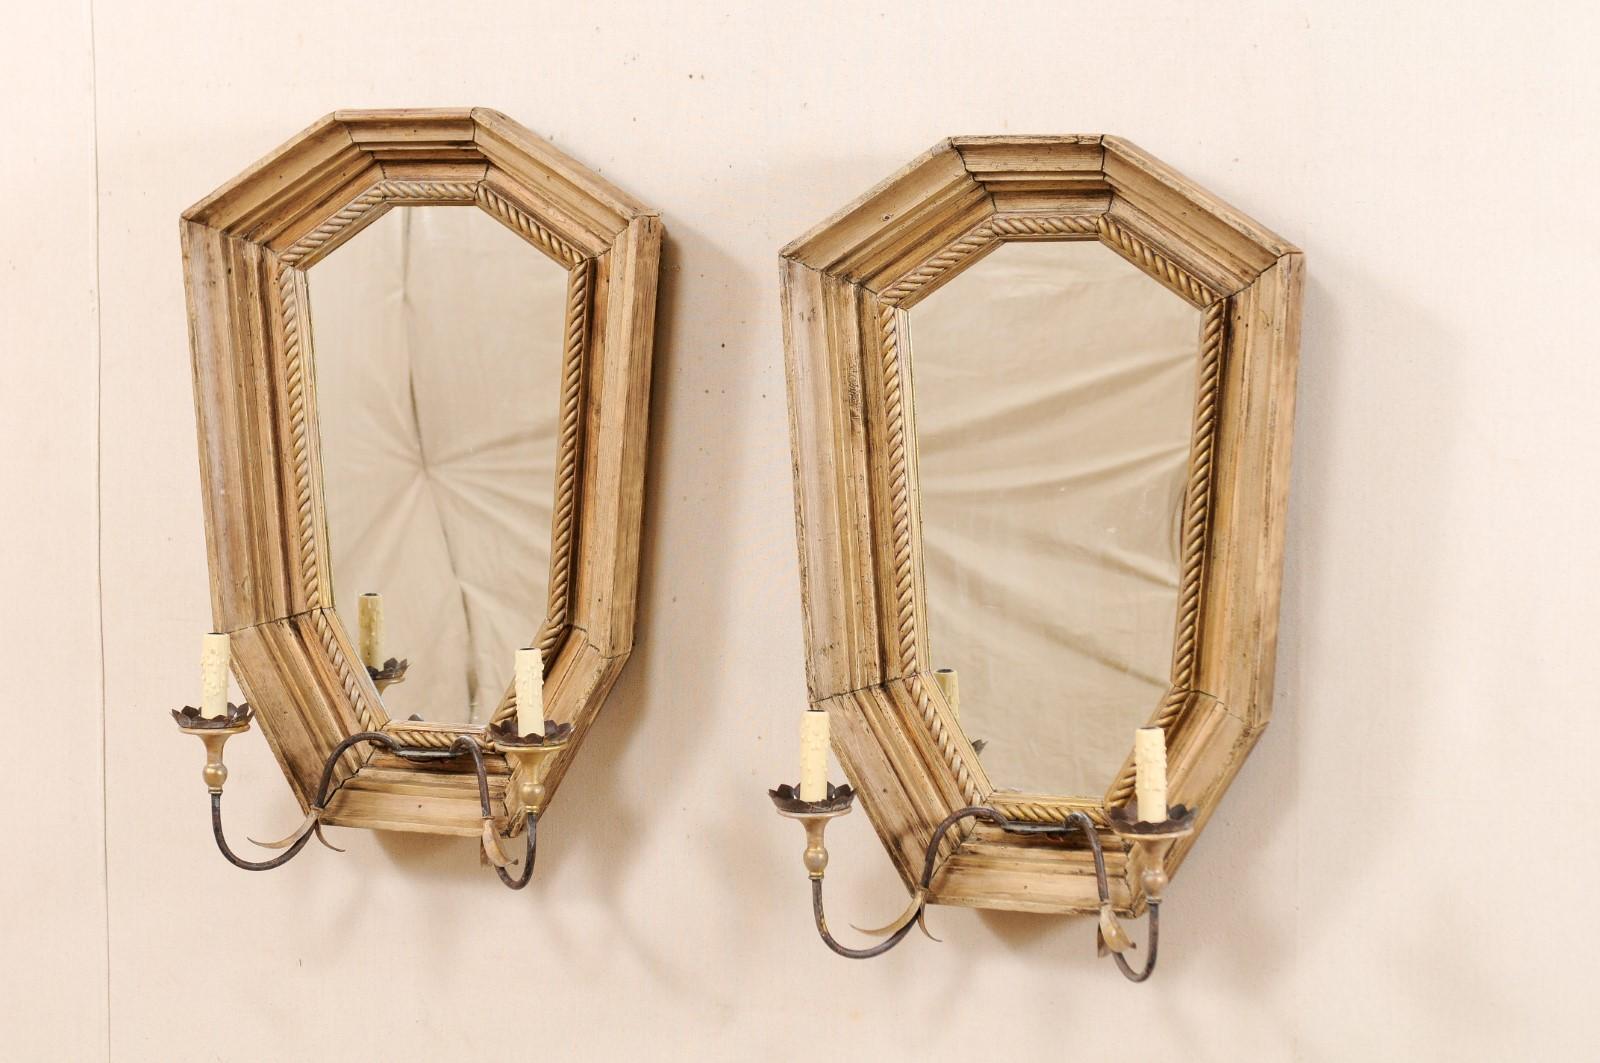 Carved Italian Mid-20th Century Sconces with Large Mirrored Back-Plate